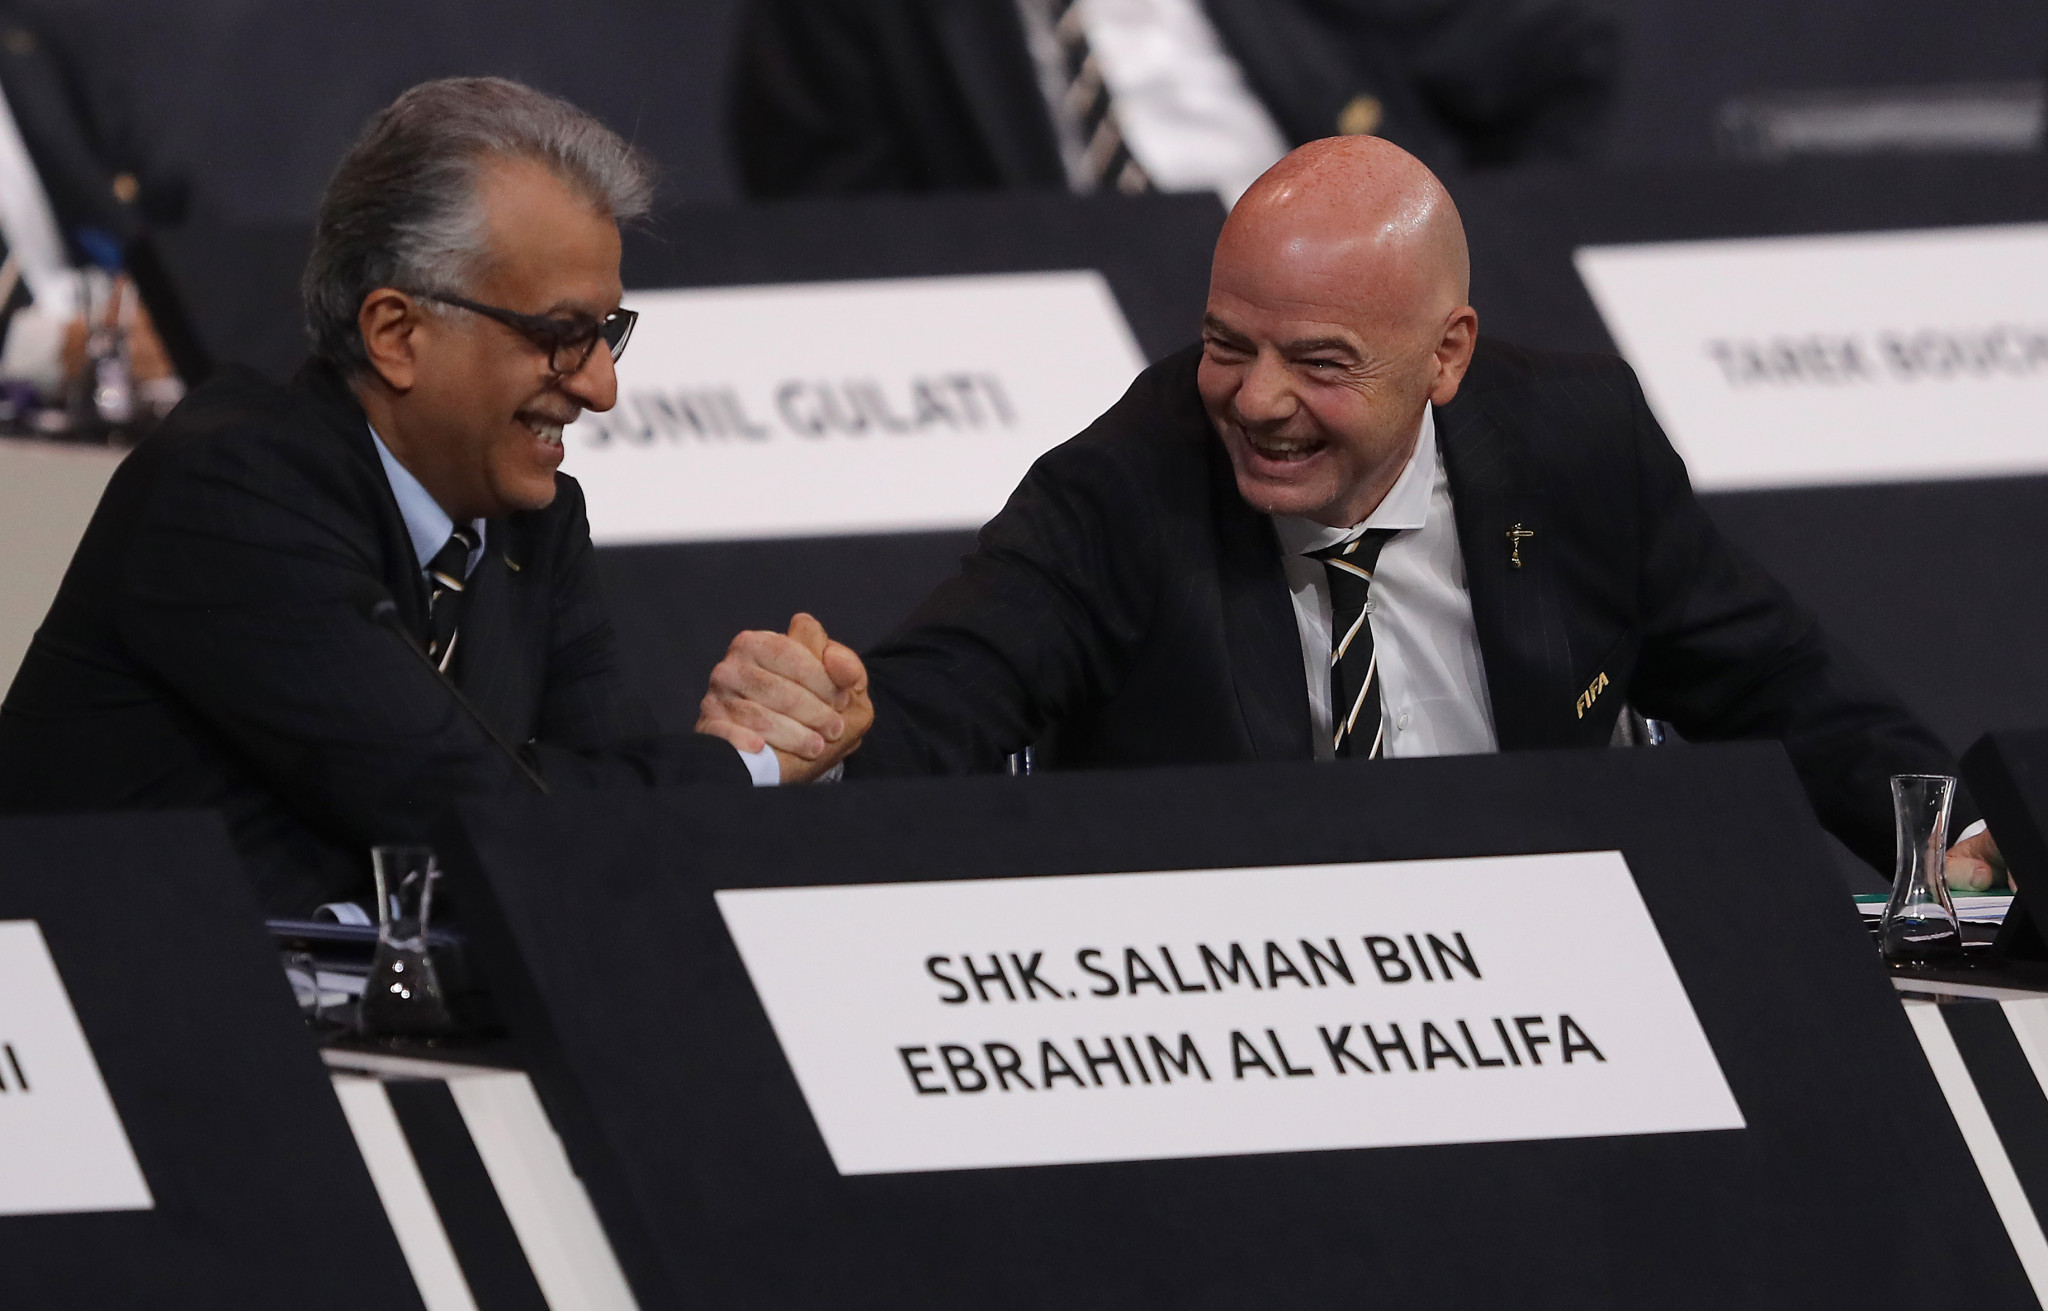 Shaikh Salman bin Ebrahim Al Khalifa, left, is due to be re-elected as President at the AFC Congress while FIFA head Gianni Infantino, right, is set to attend ©Getty Images